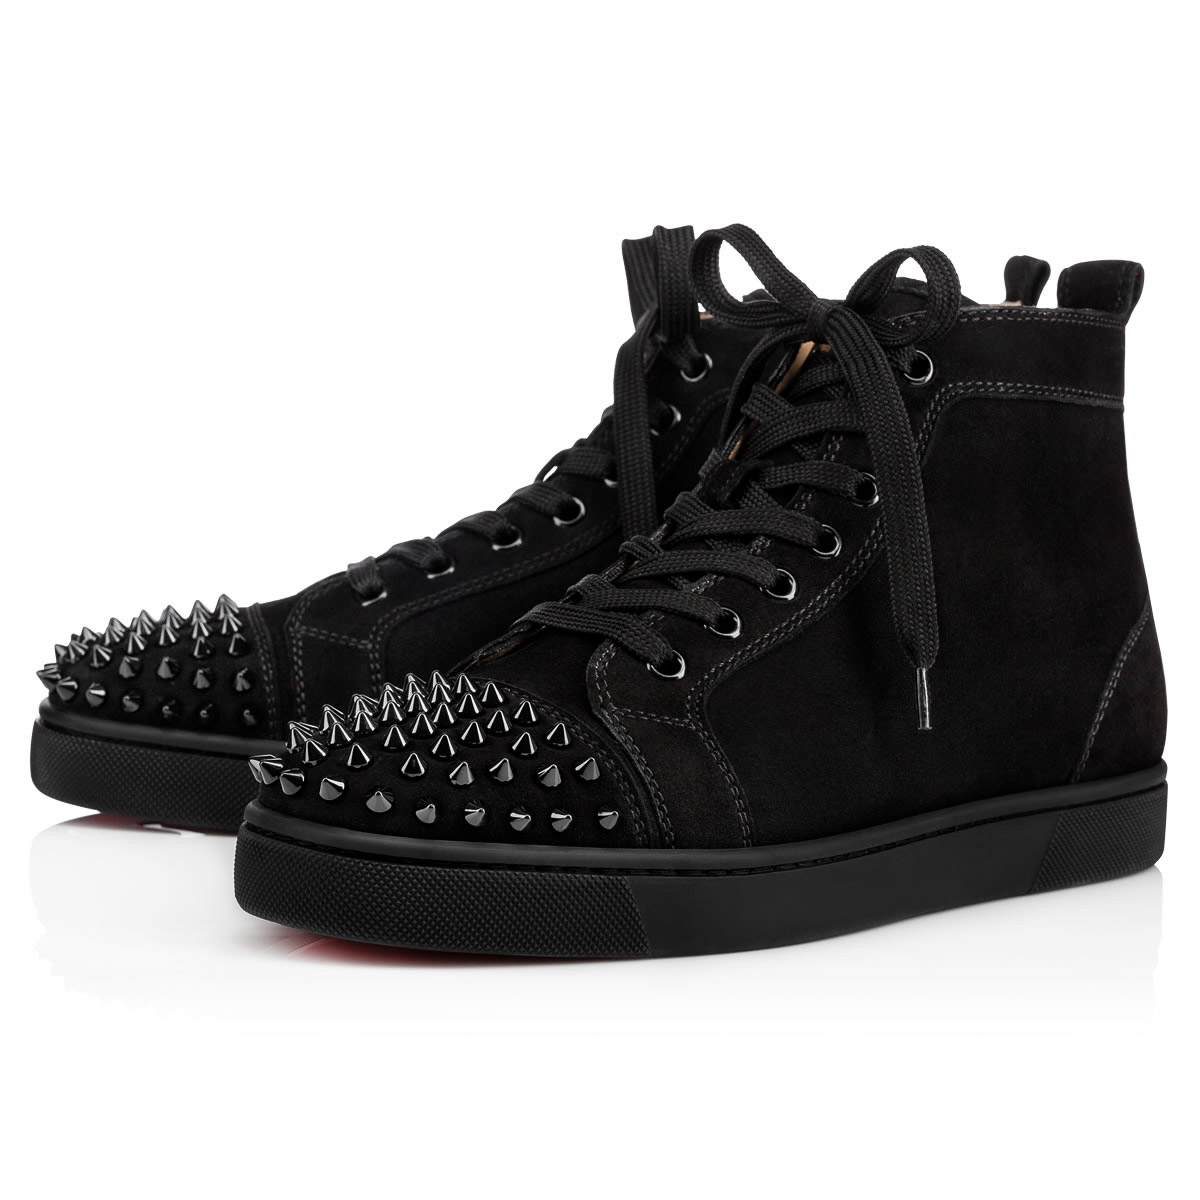 Christian Louboutin Louis Spikes High Top Sneakers, Red